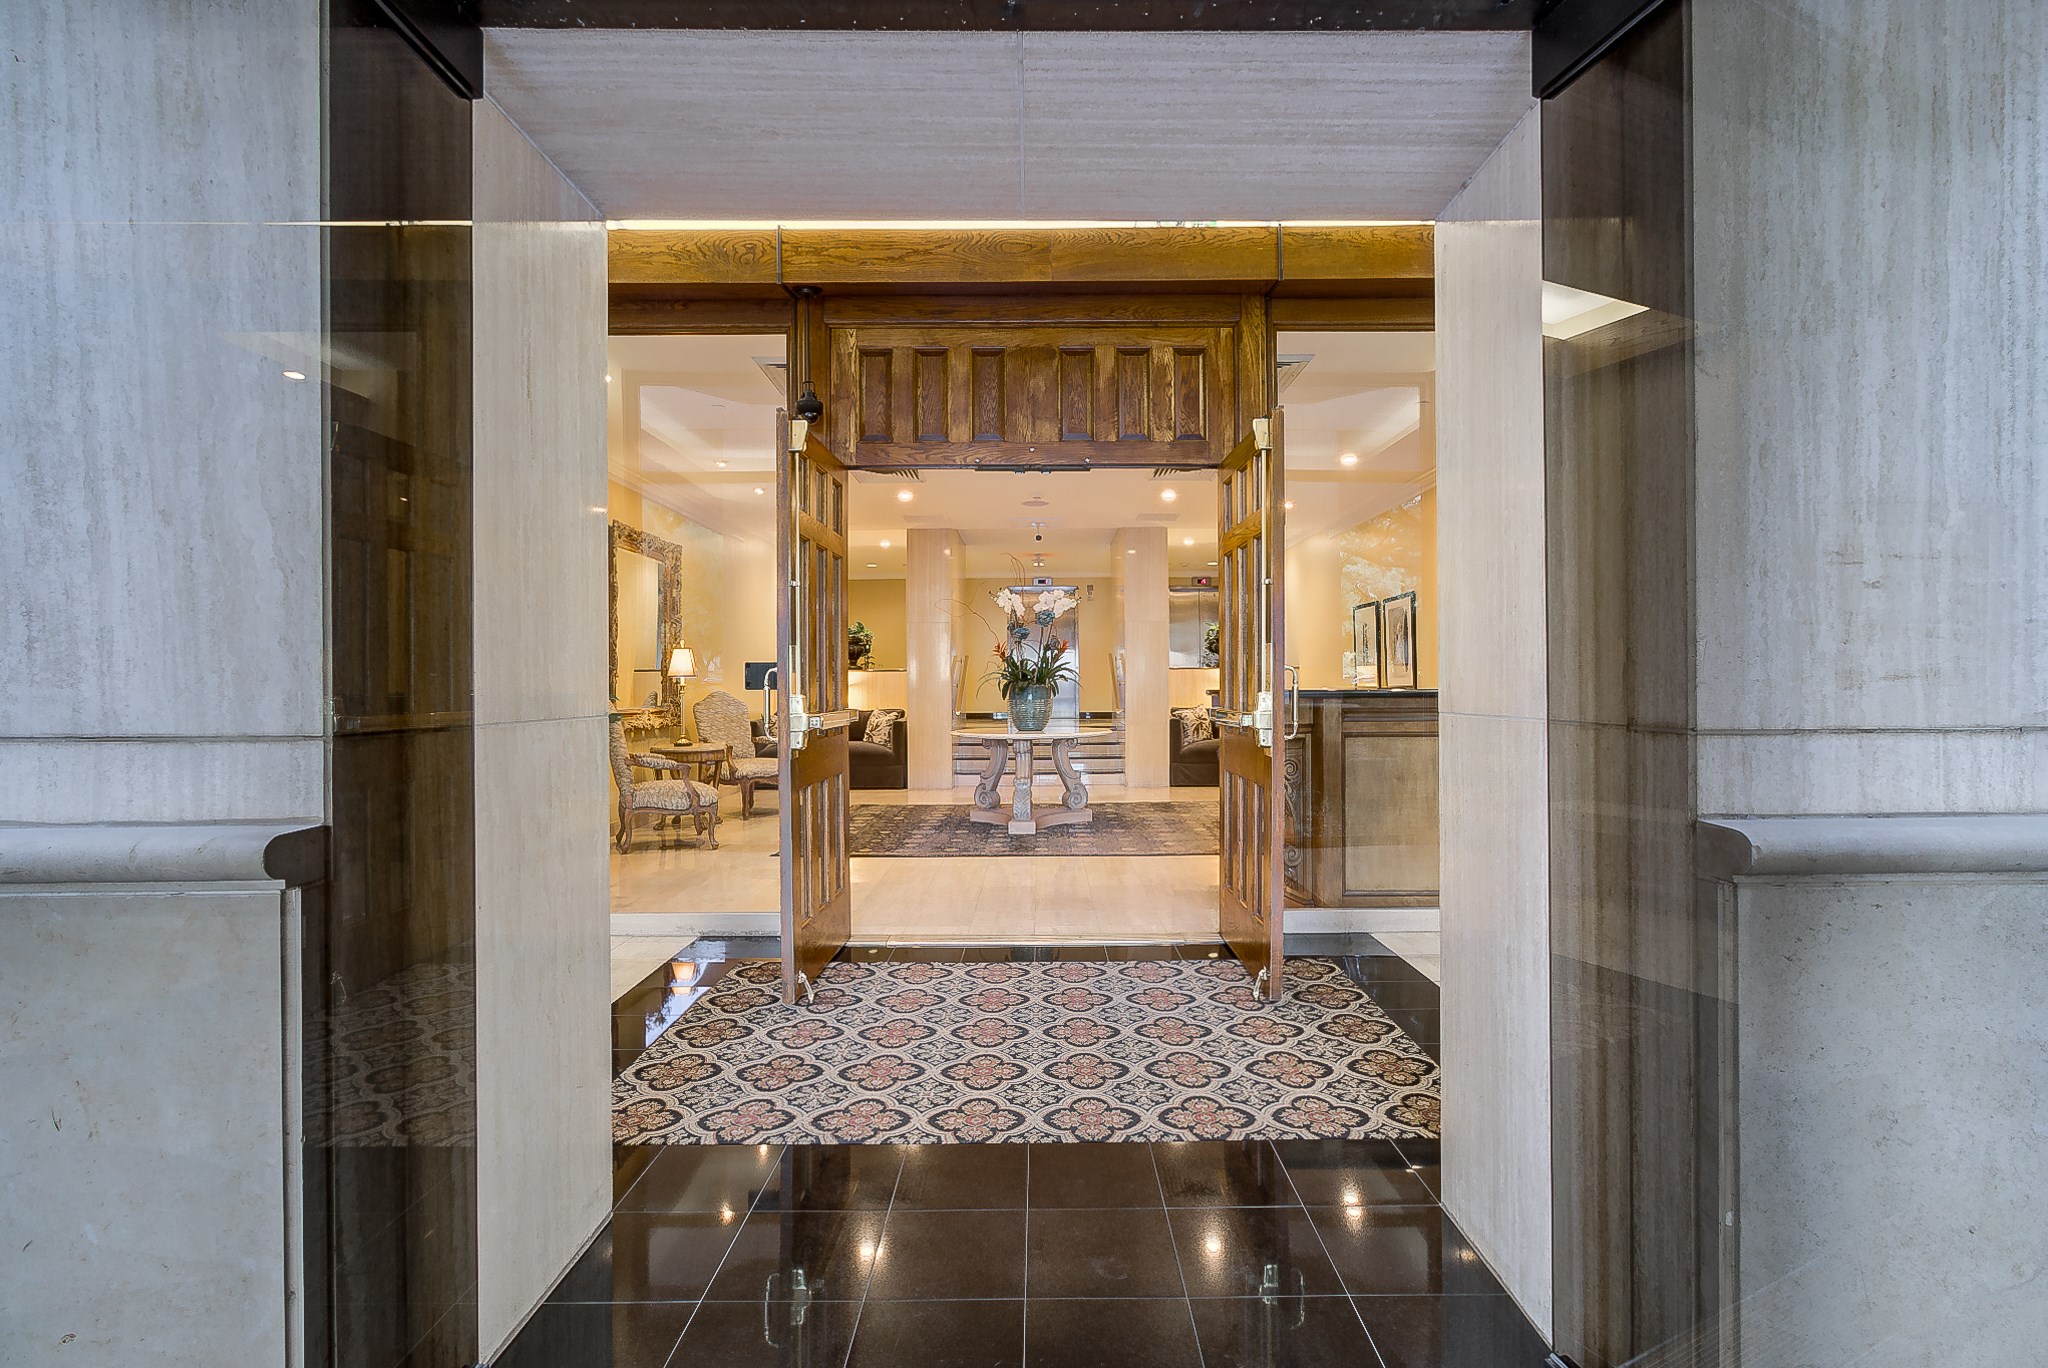 Entrance to building lobby